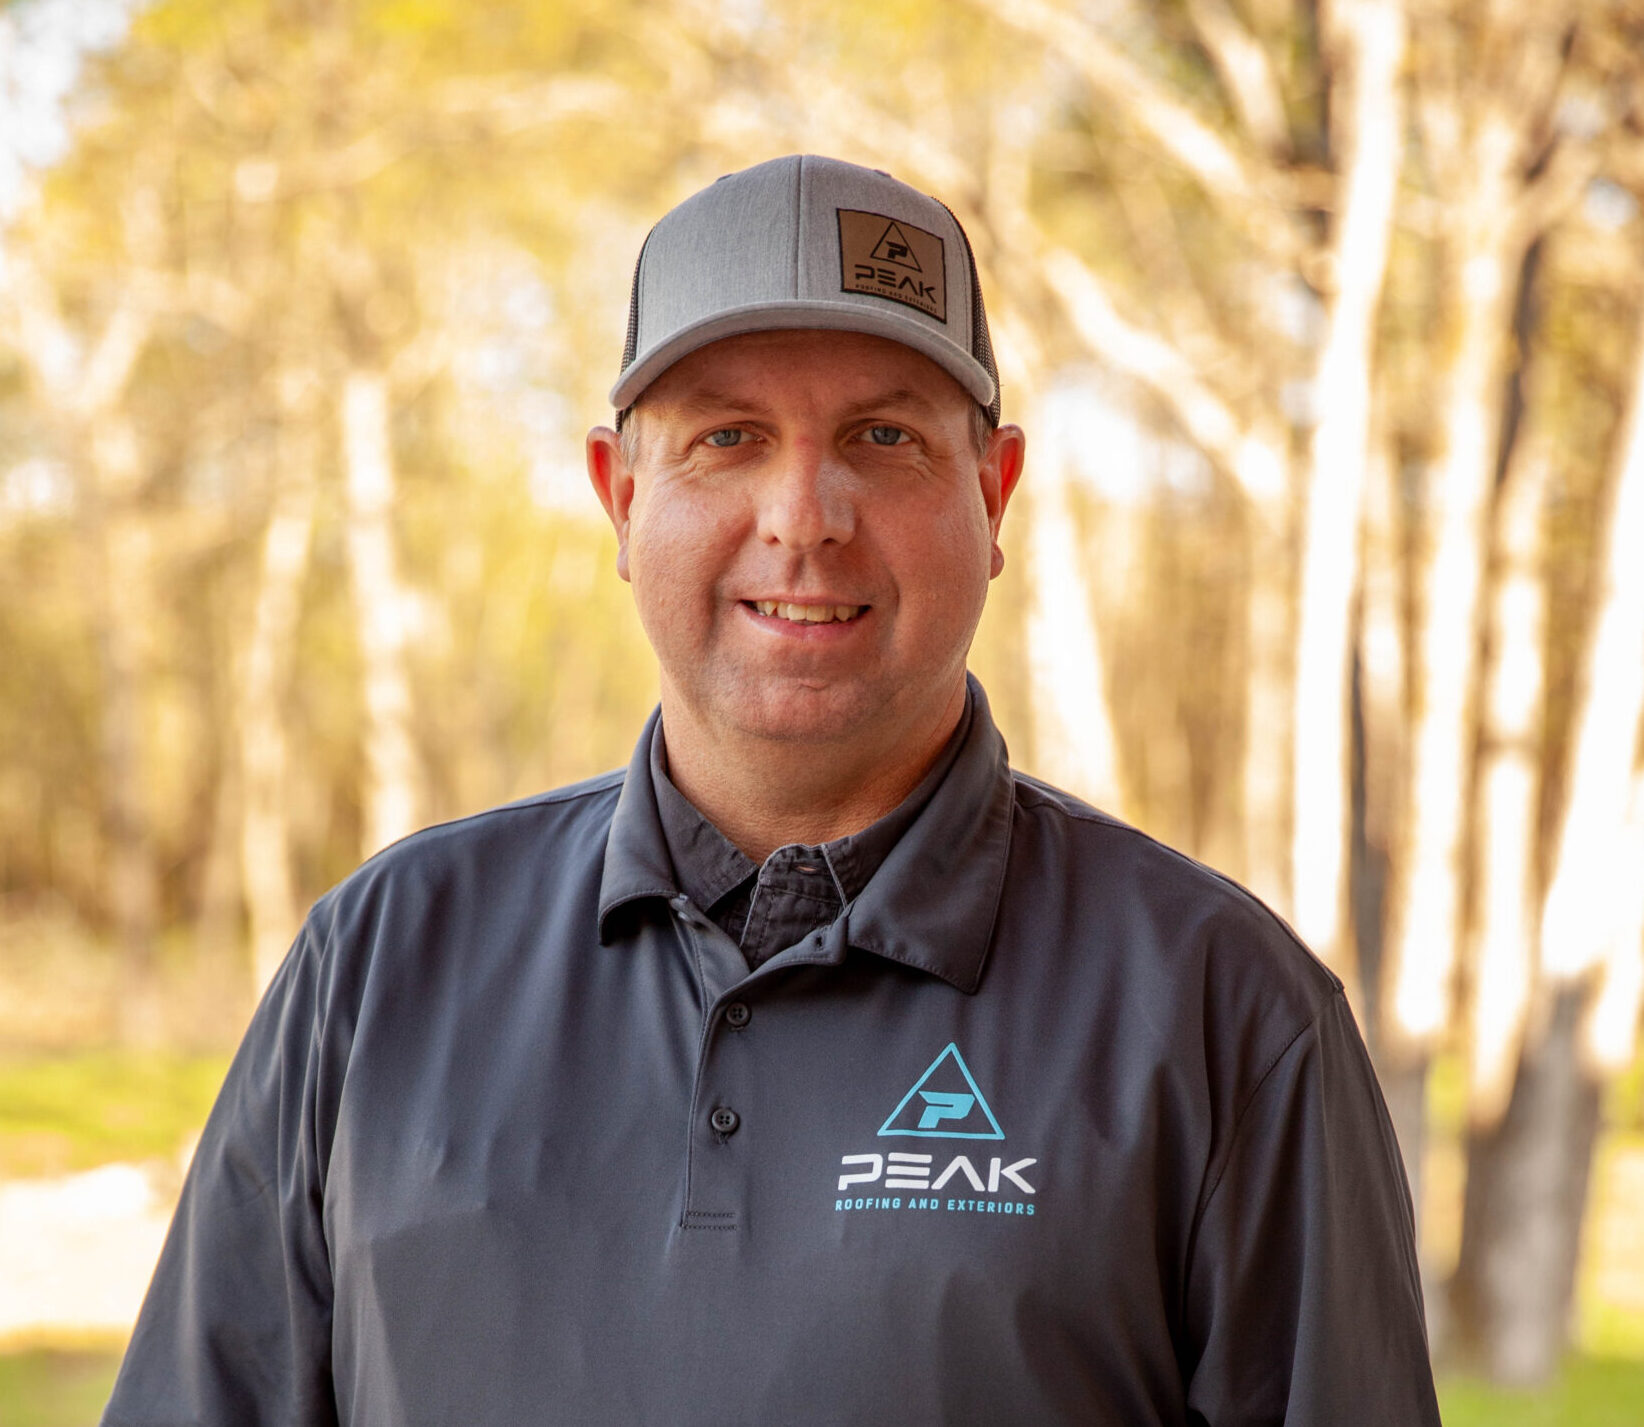 Jonathan-Holland-Owner-Peak-Roofing-and-Construction-Northeast-Louisiana